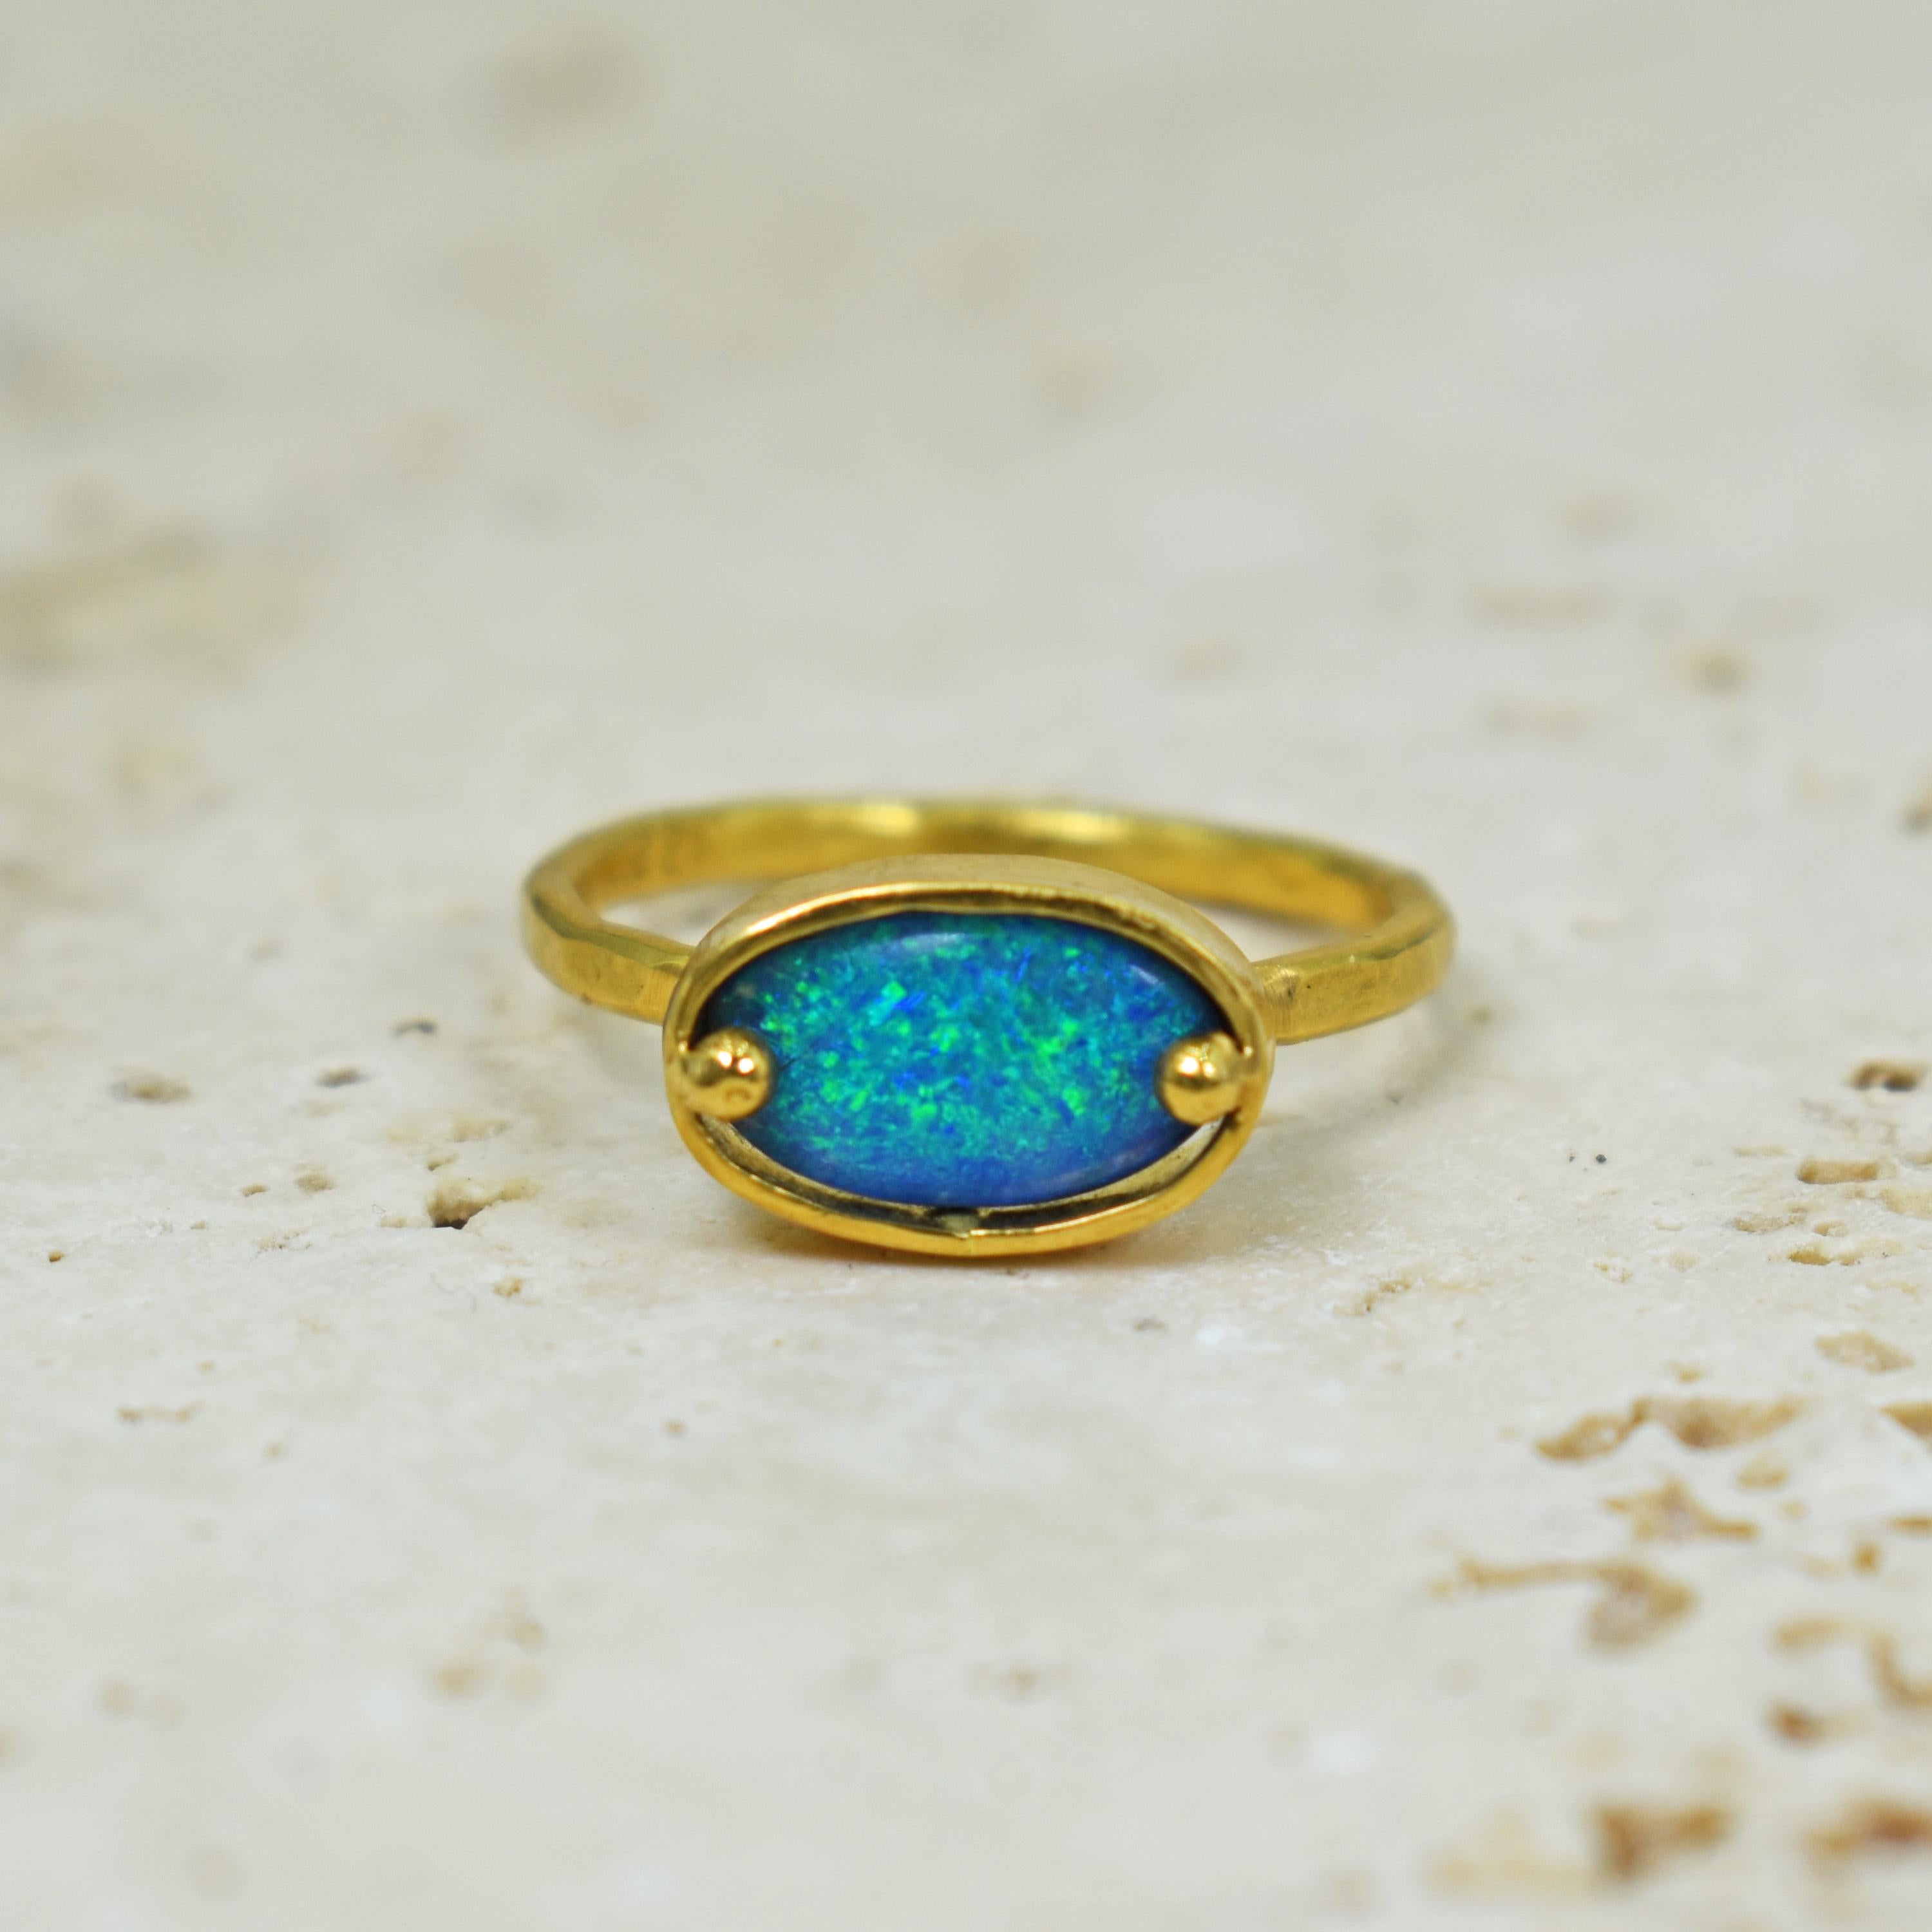 Blue Australian Opal 1.16 carat cabochon set in a textured, hand forged 22k yellow gold bezel and accent prong solitaire ring. This stunning green flash Opal paired with hammered, high karat gold fuses contemporary, minimalist elegance with old